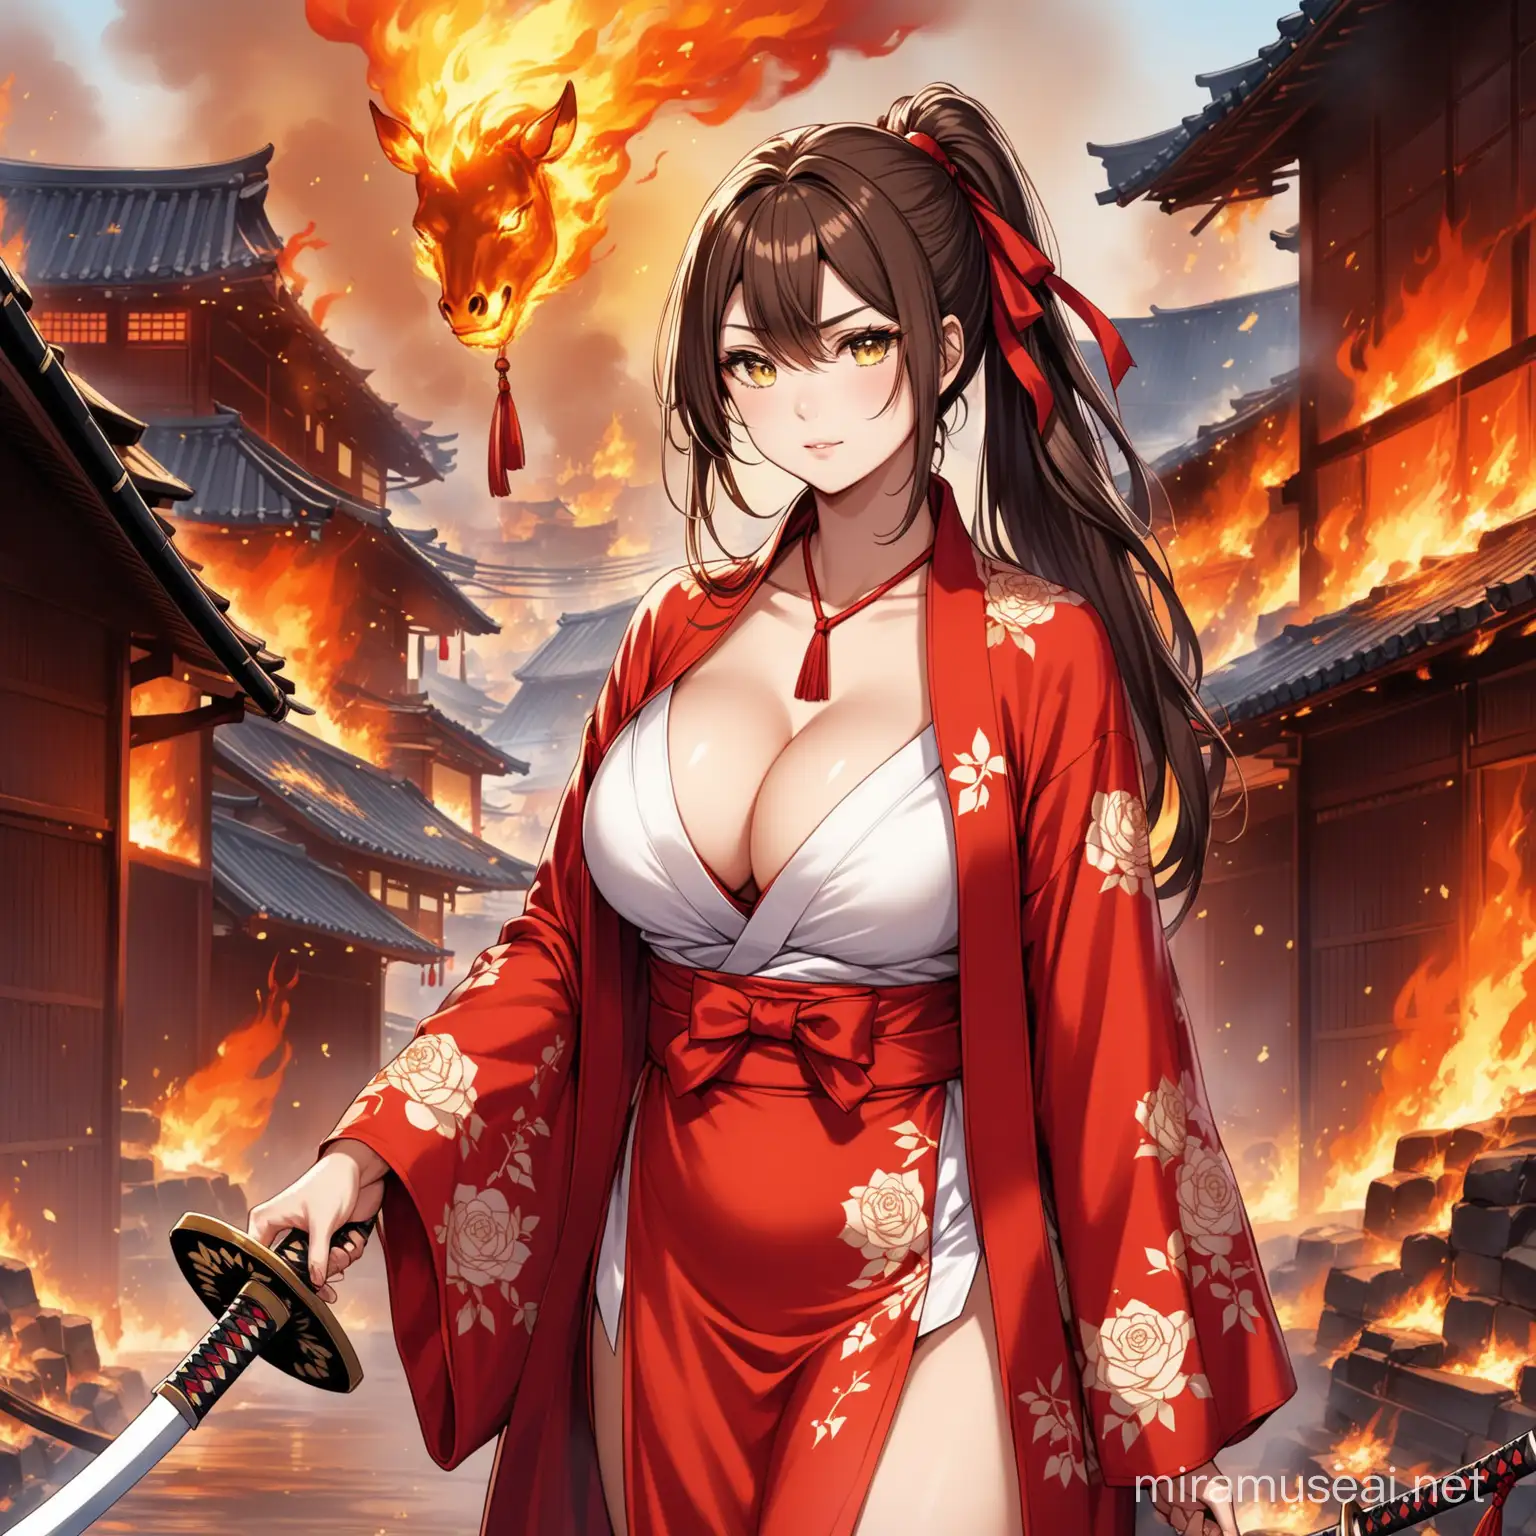 A 19 year old looking girl with brown long hair. With a red ribbon on the pony. She is wearing a red and white hewlan kimono. She have big boobs. She have yellow eyes. Above her wrist she have a tattoo of an elegant rose. In her hand she is holding a red themed glorious katana. Above her hewlan kimono she is hanging a white-golden-red themed coat like cape, like navy Admirals wear. Scorching flame fragments small as little are coming out of her neck. Background is a burnt massacred samurai town